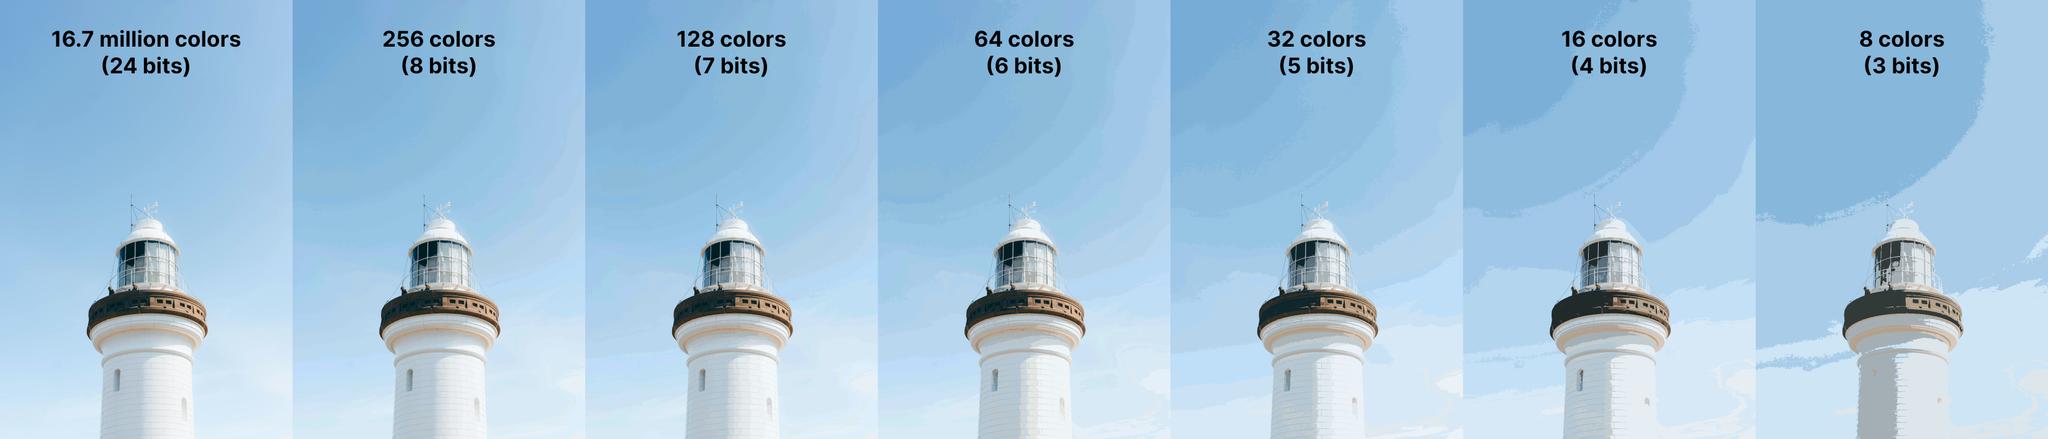 Visual analogy using a photo with colors representing bit depth